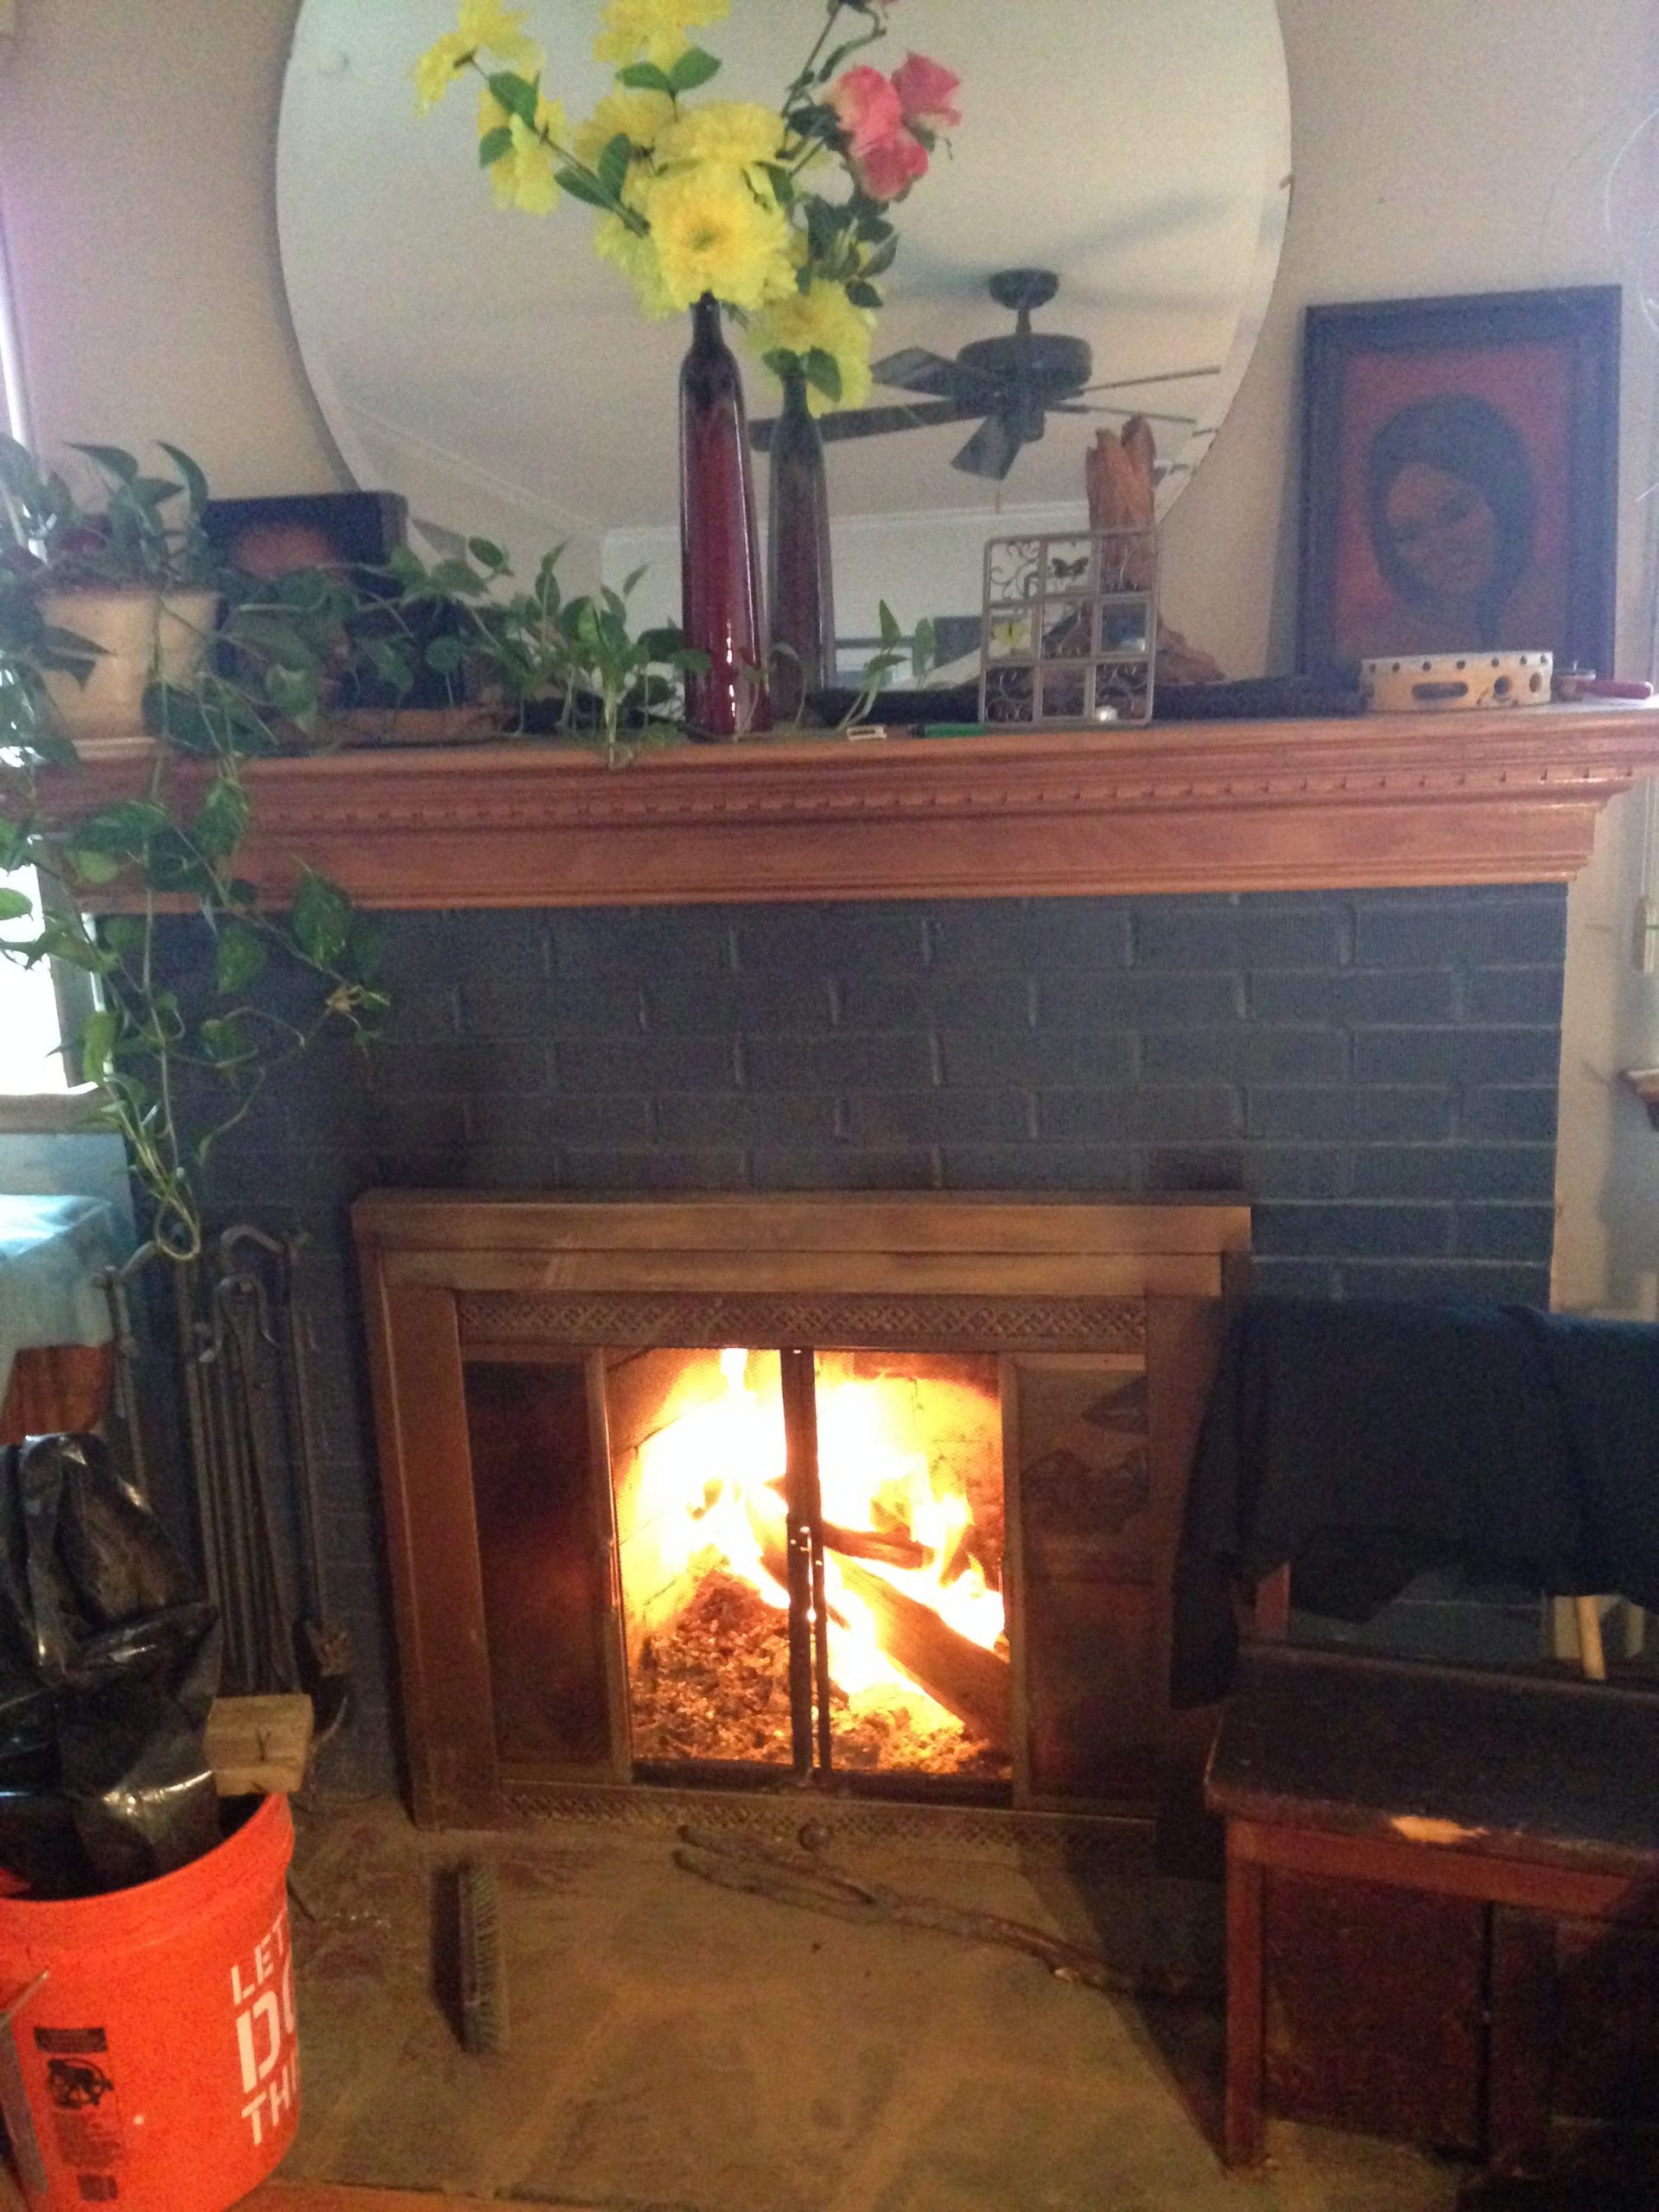 pic of fireplace. energetics inside. burn up excess